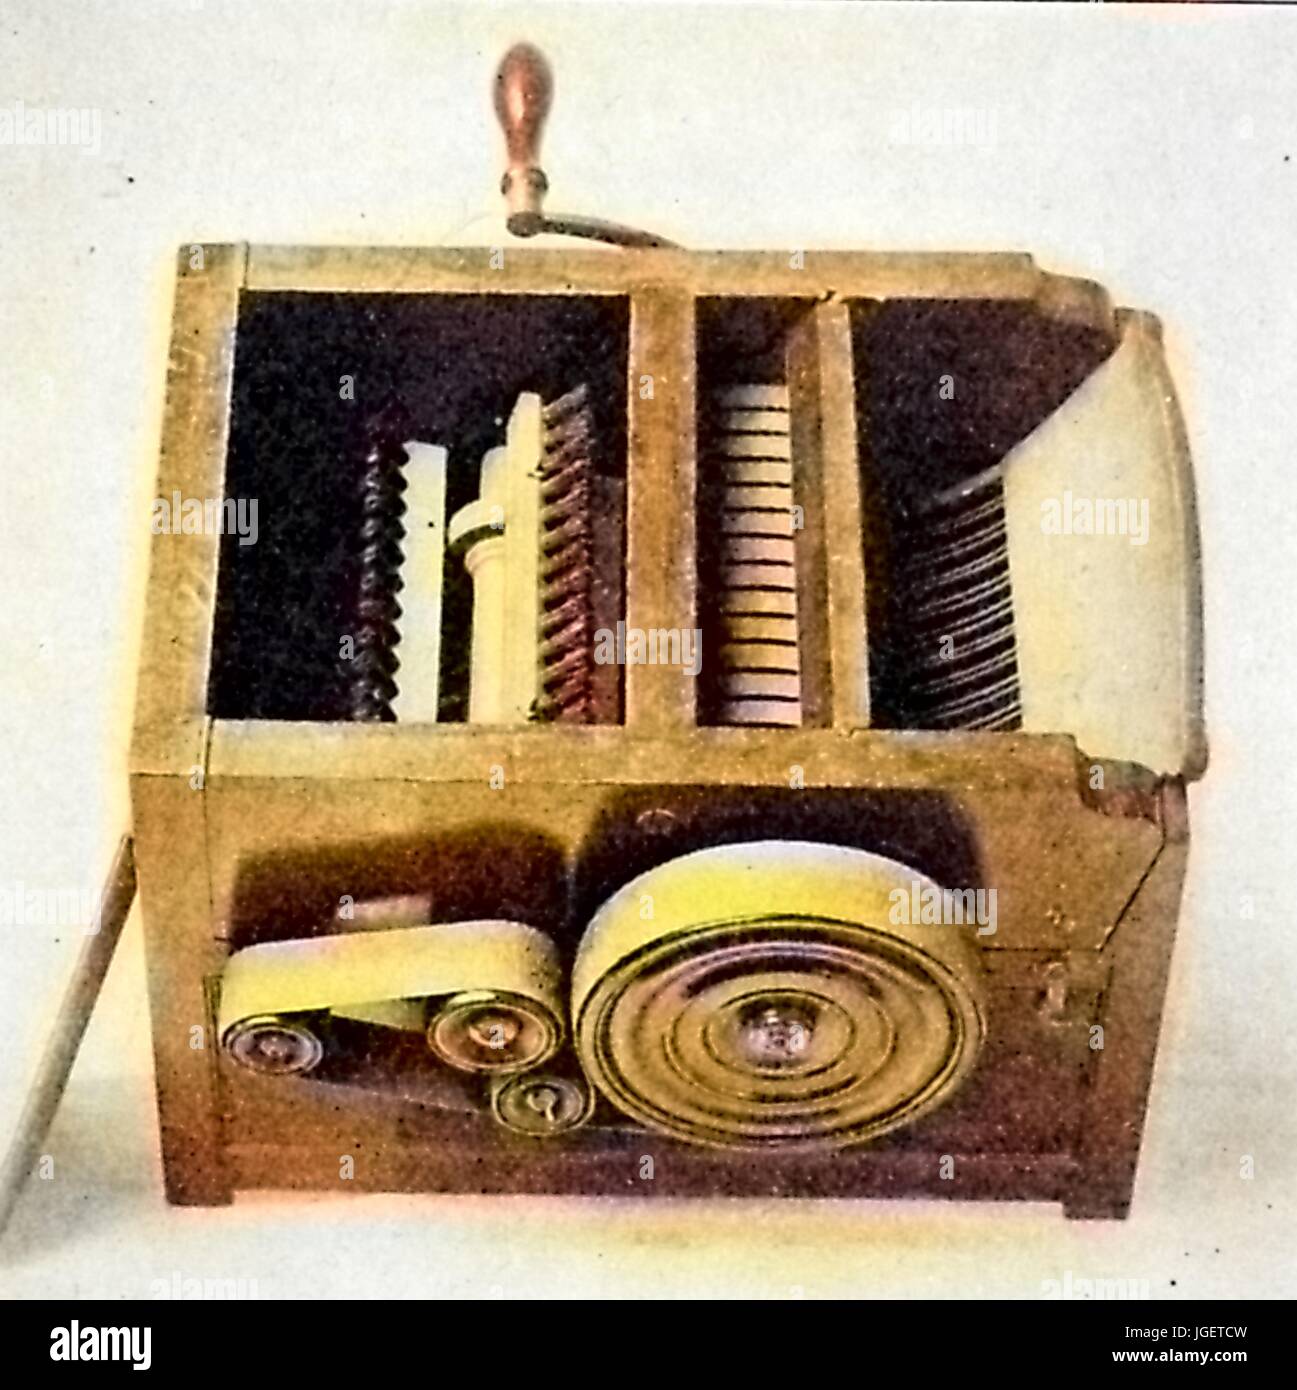 Engraving of a design for a compact cotton gin, with a crank and belt drive mechanism, 1916. Note: Image has been digitally colorized using a modern process. Colors may not be period-accurate. Stock Photo